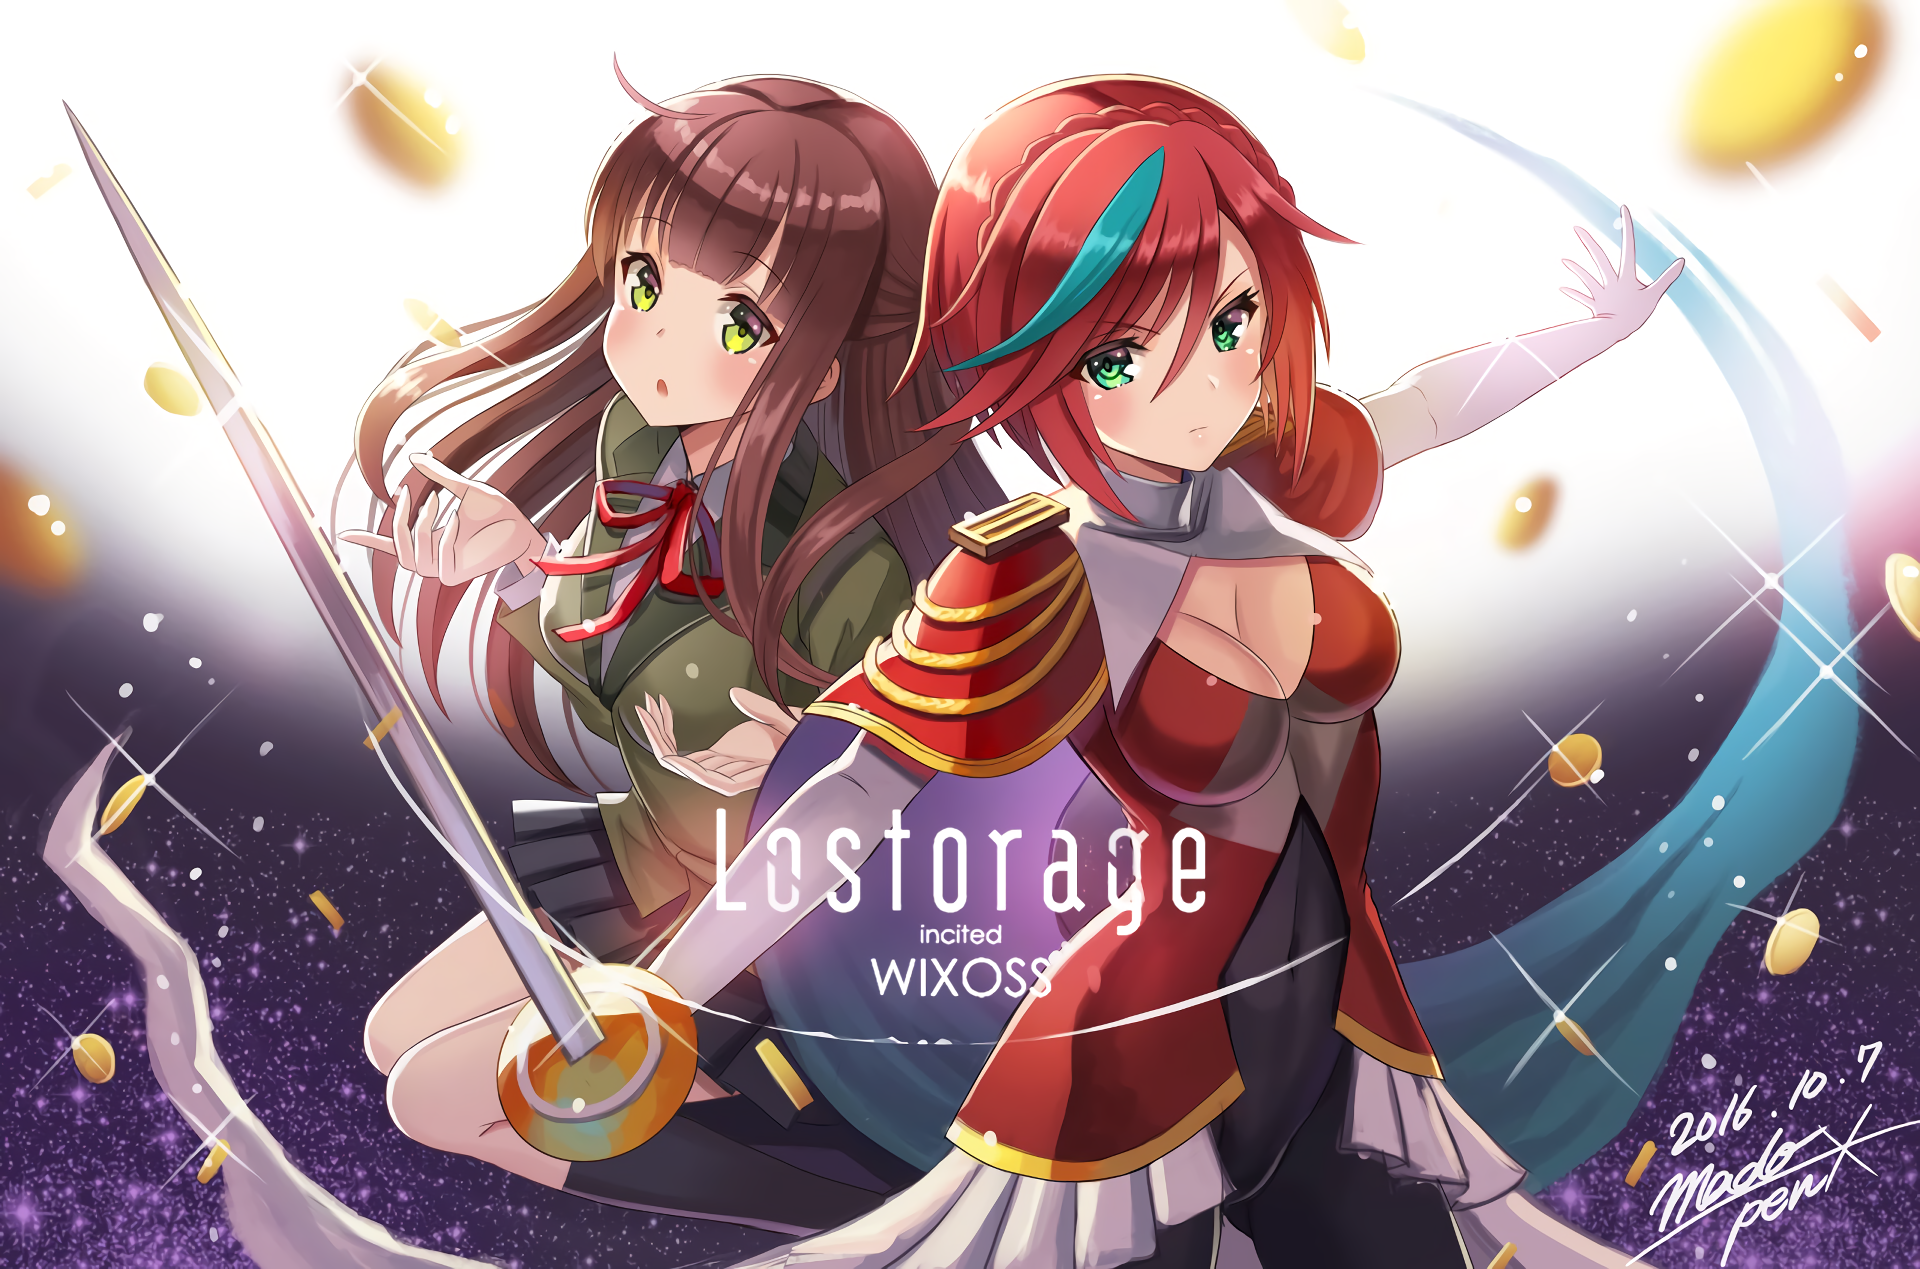 Lostorage Incited WIXOSS Debuts October 8th - Designs & Commercial Revealed  - Otaku Tale